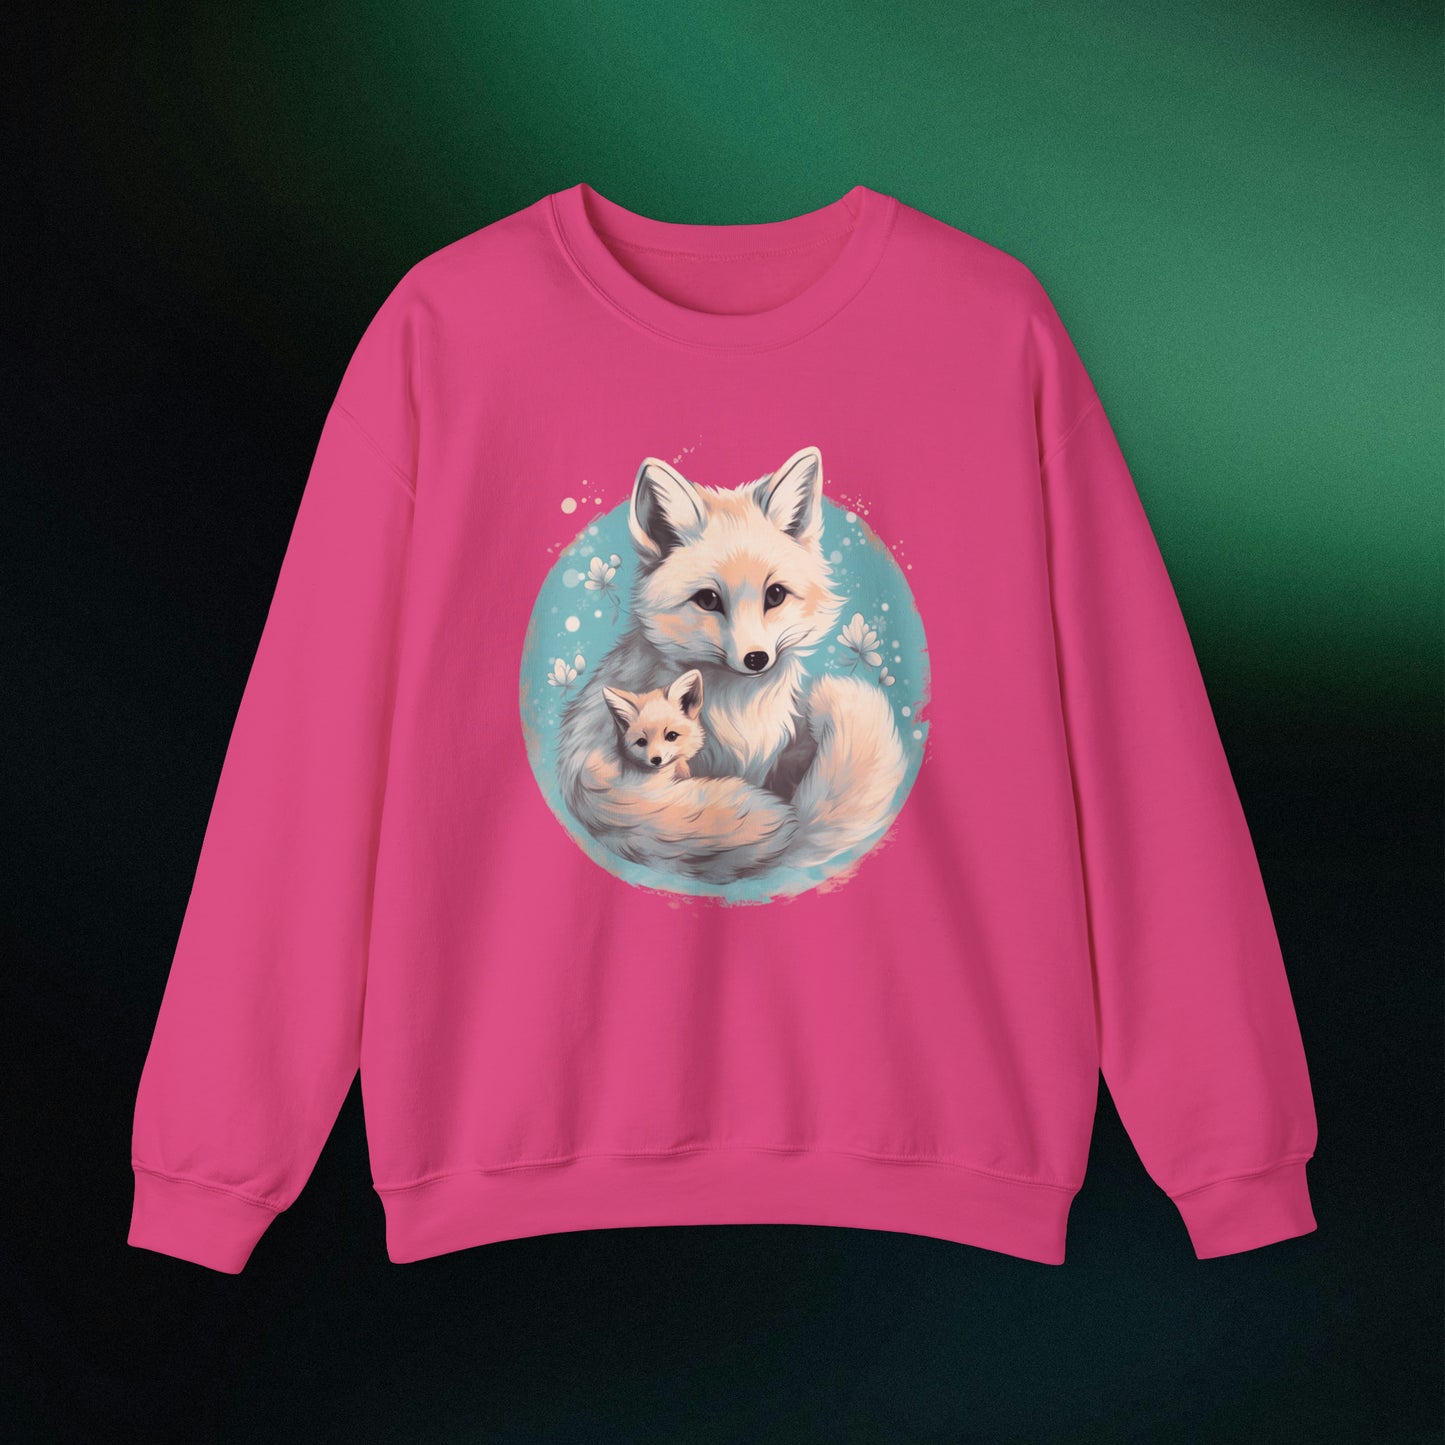 Vintage Forest Witch Aesthetic Sweatshirt - Cozy Fox Cottagecore Sweater with Mommy and Baby Fox Design Sweatshirt S Heliconia 